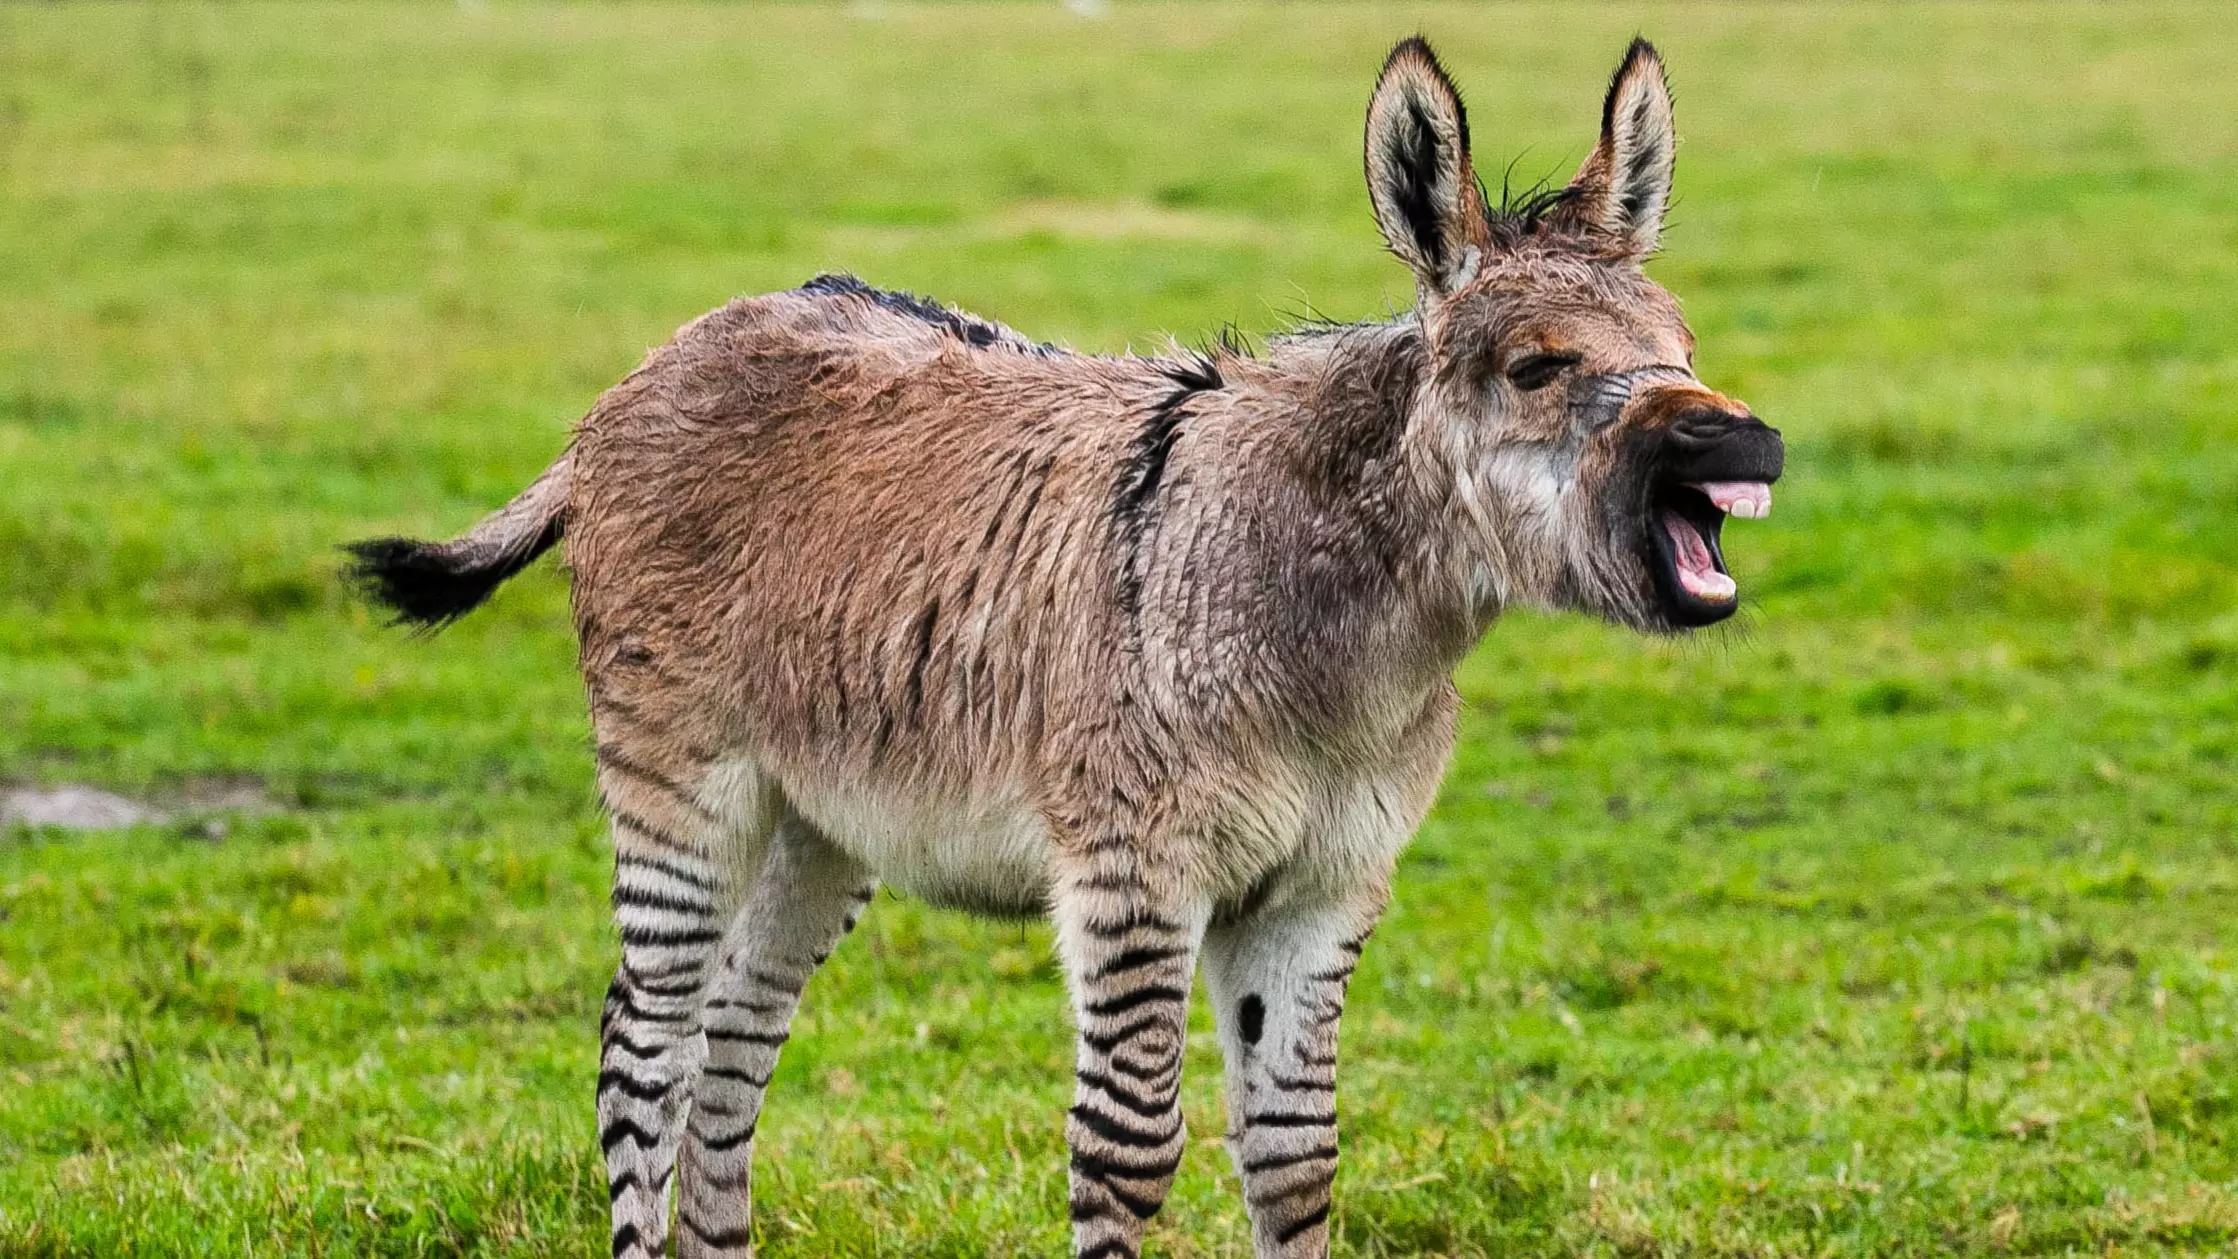 This Is What Happens When A Zebra And A Donkey Have A Baby